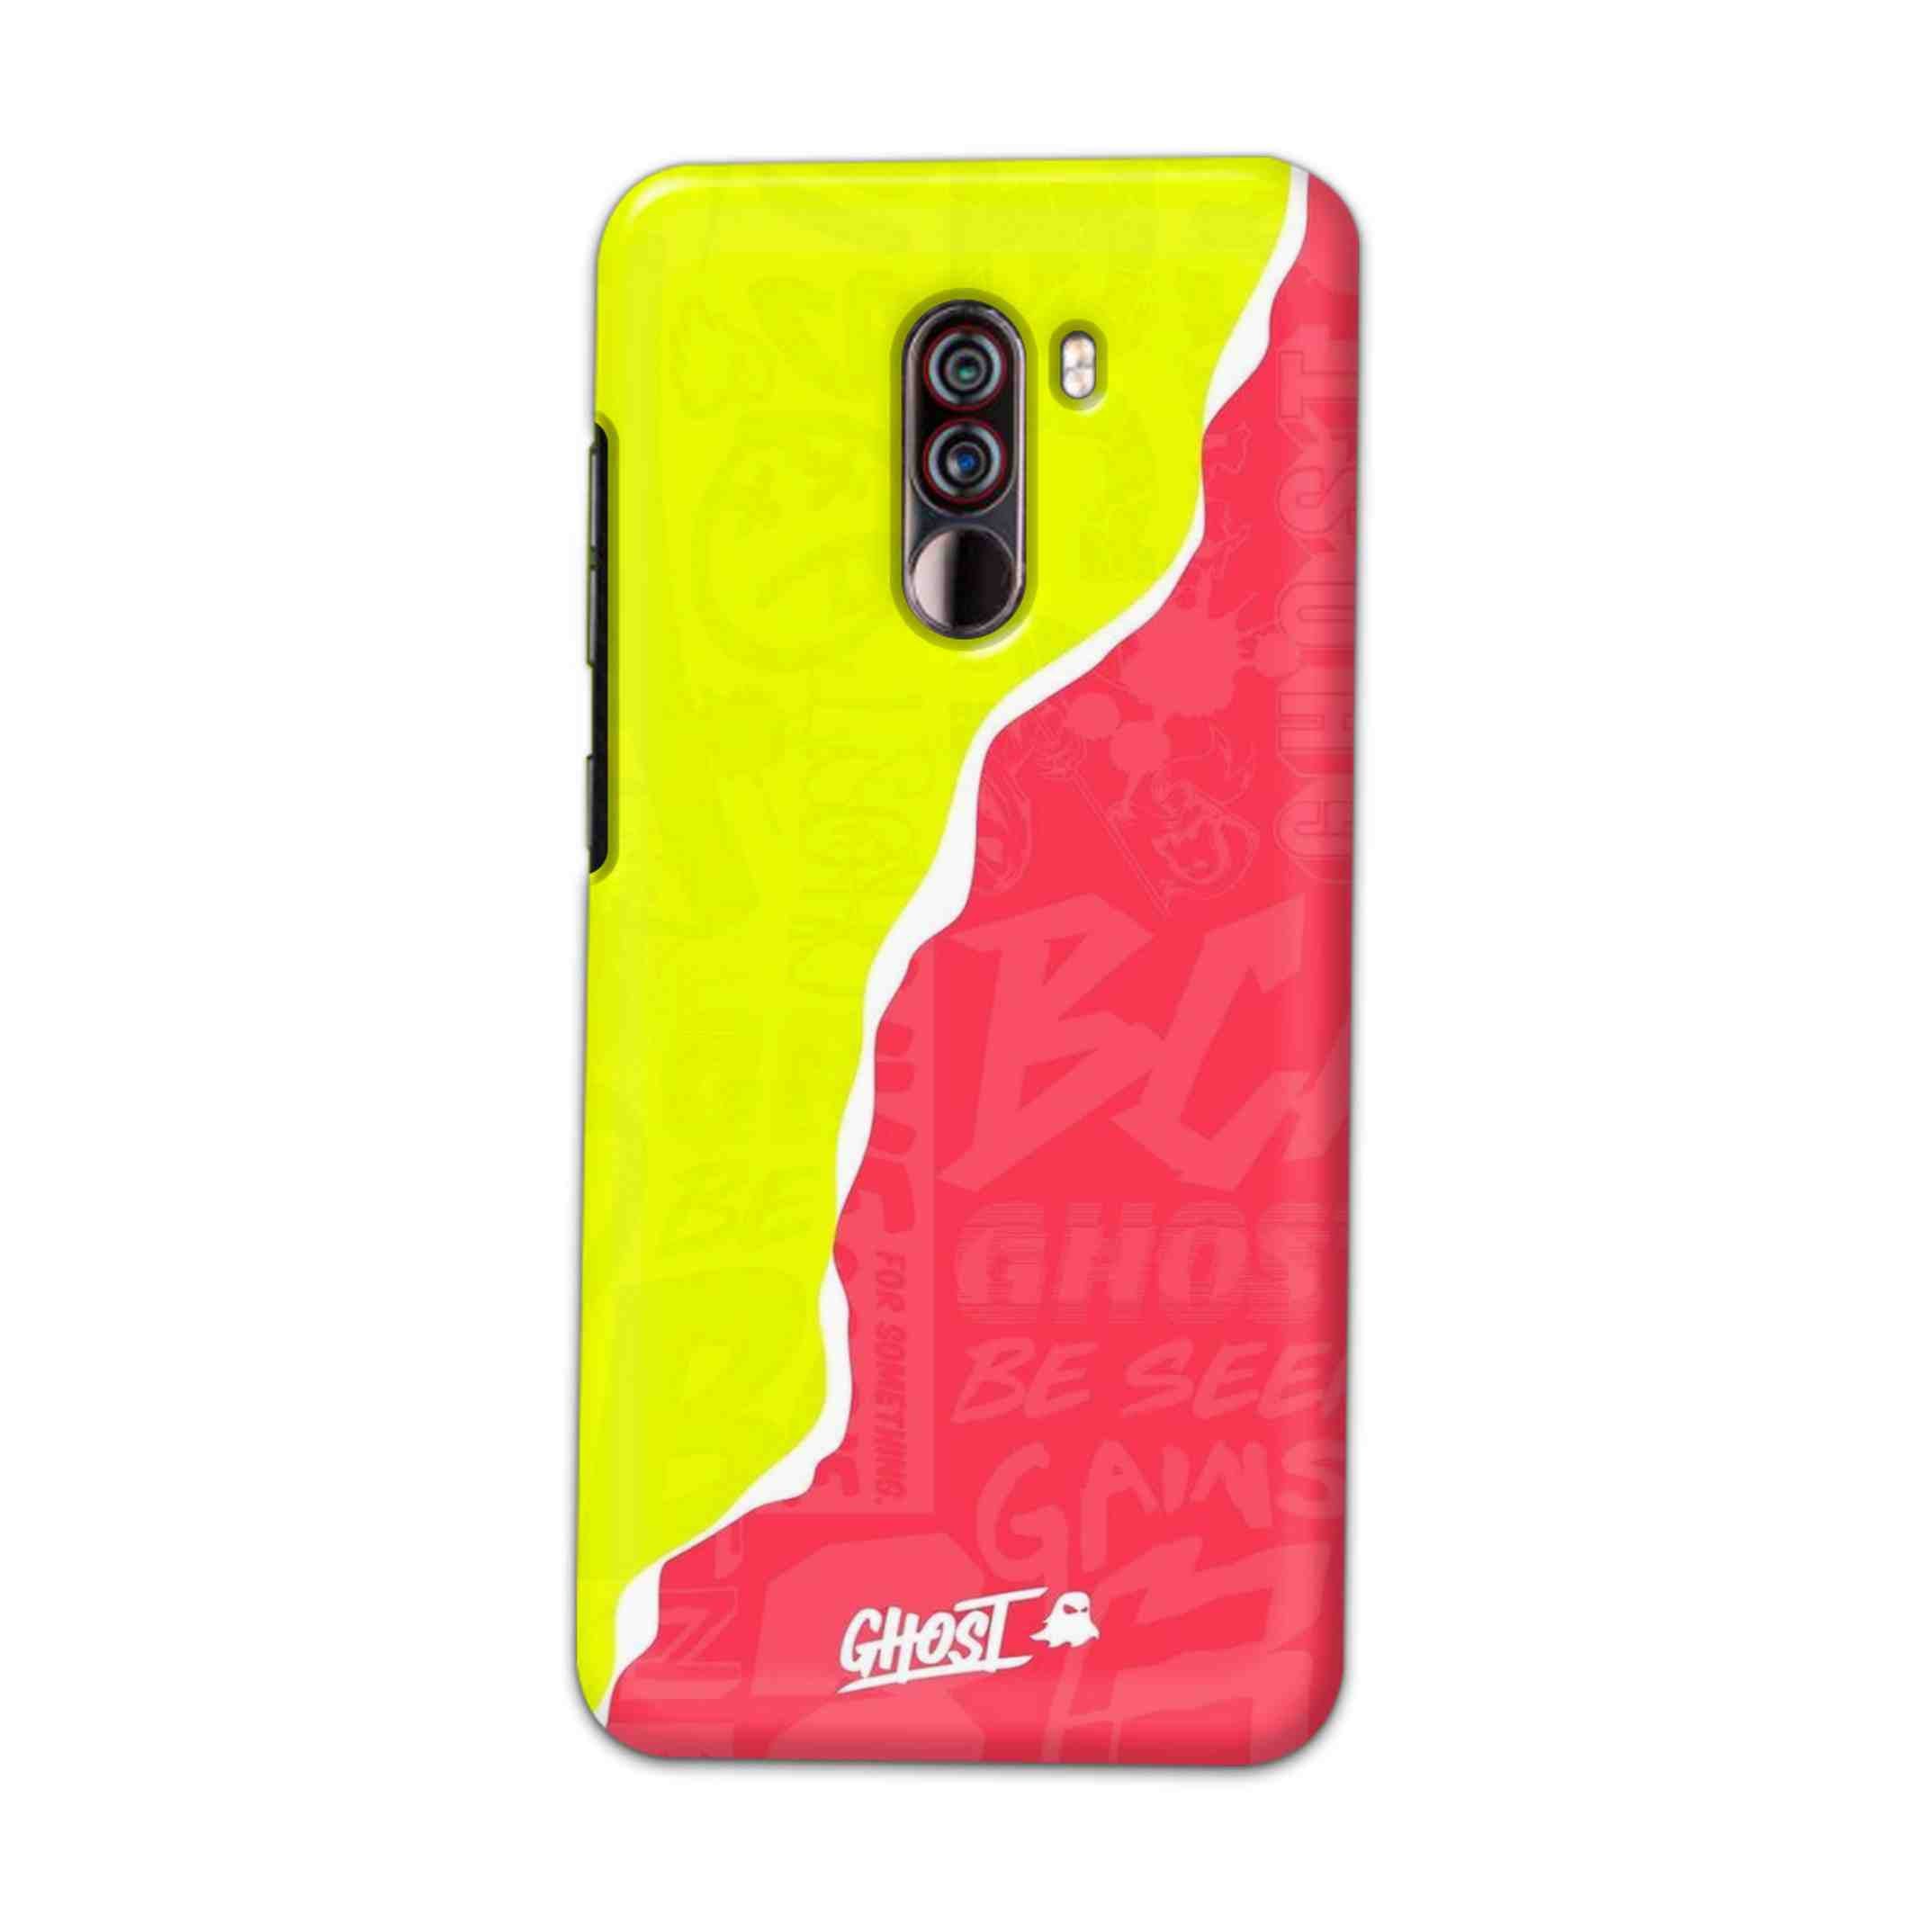 Buy Ghost Hard Back Mobile Phone Case Cover For Xiaomi Pocophone F1 Online